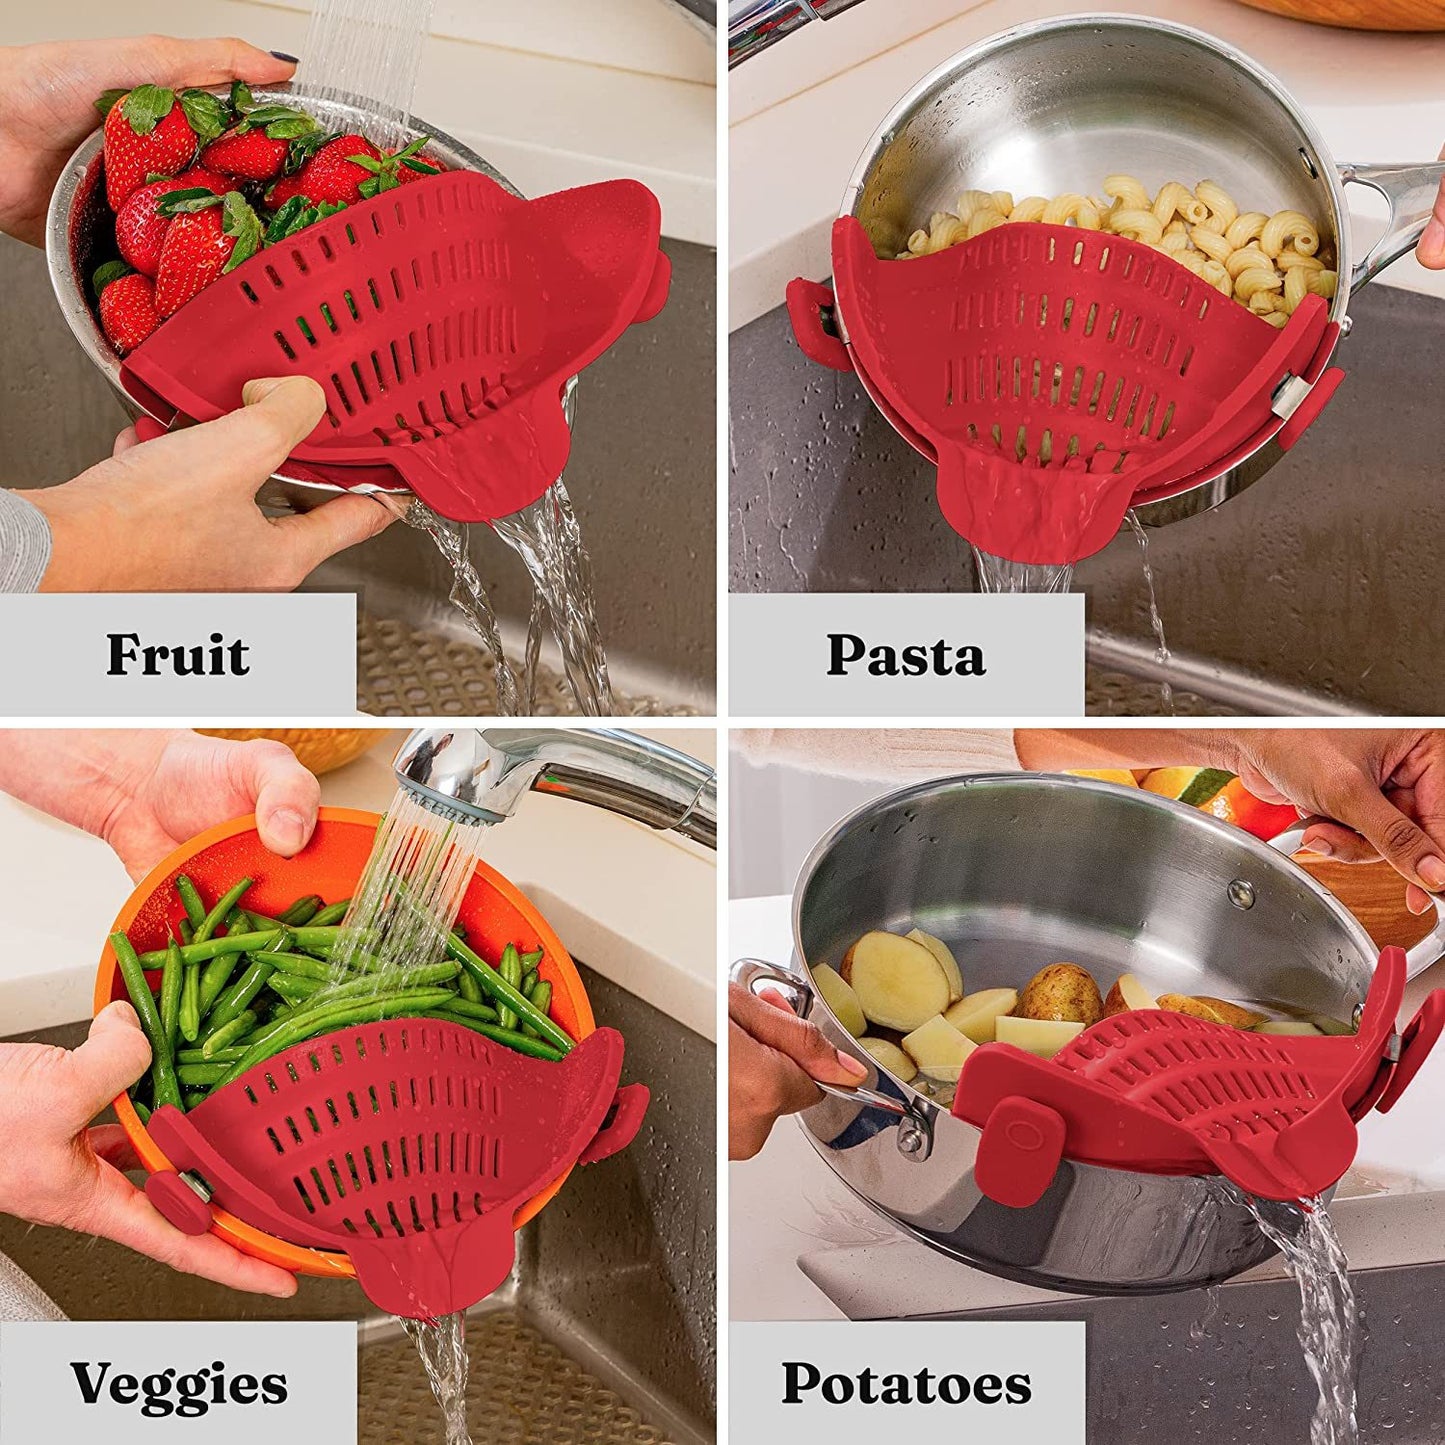 Kitchen Snap N Strain Pot Strainer and Pasta Strainer - Adjustable Silicone Clip On Strainer for Pots, Pans, and Bowls - Gray